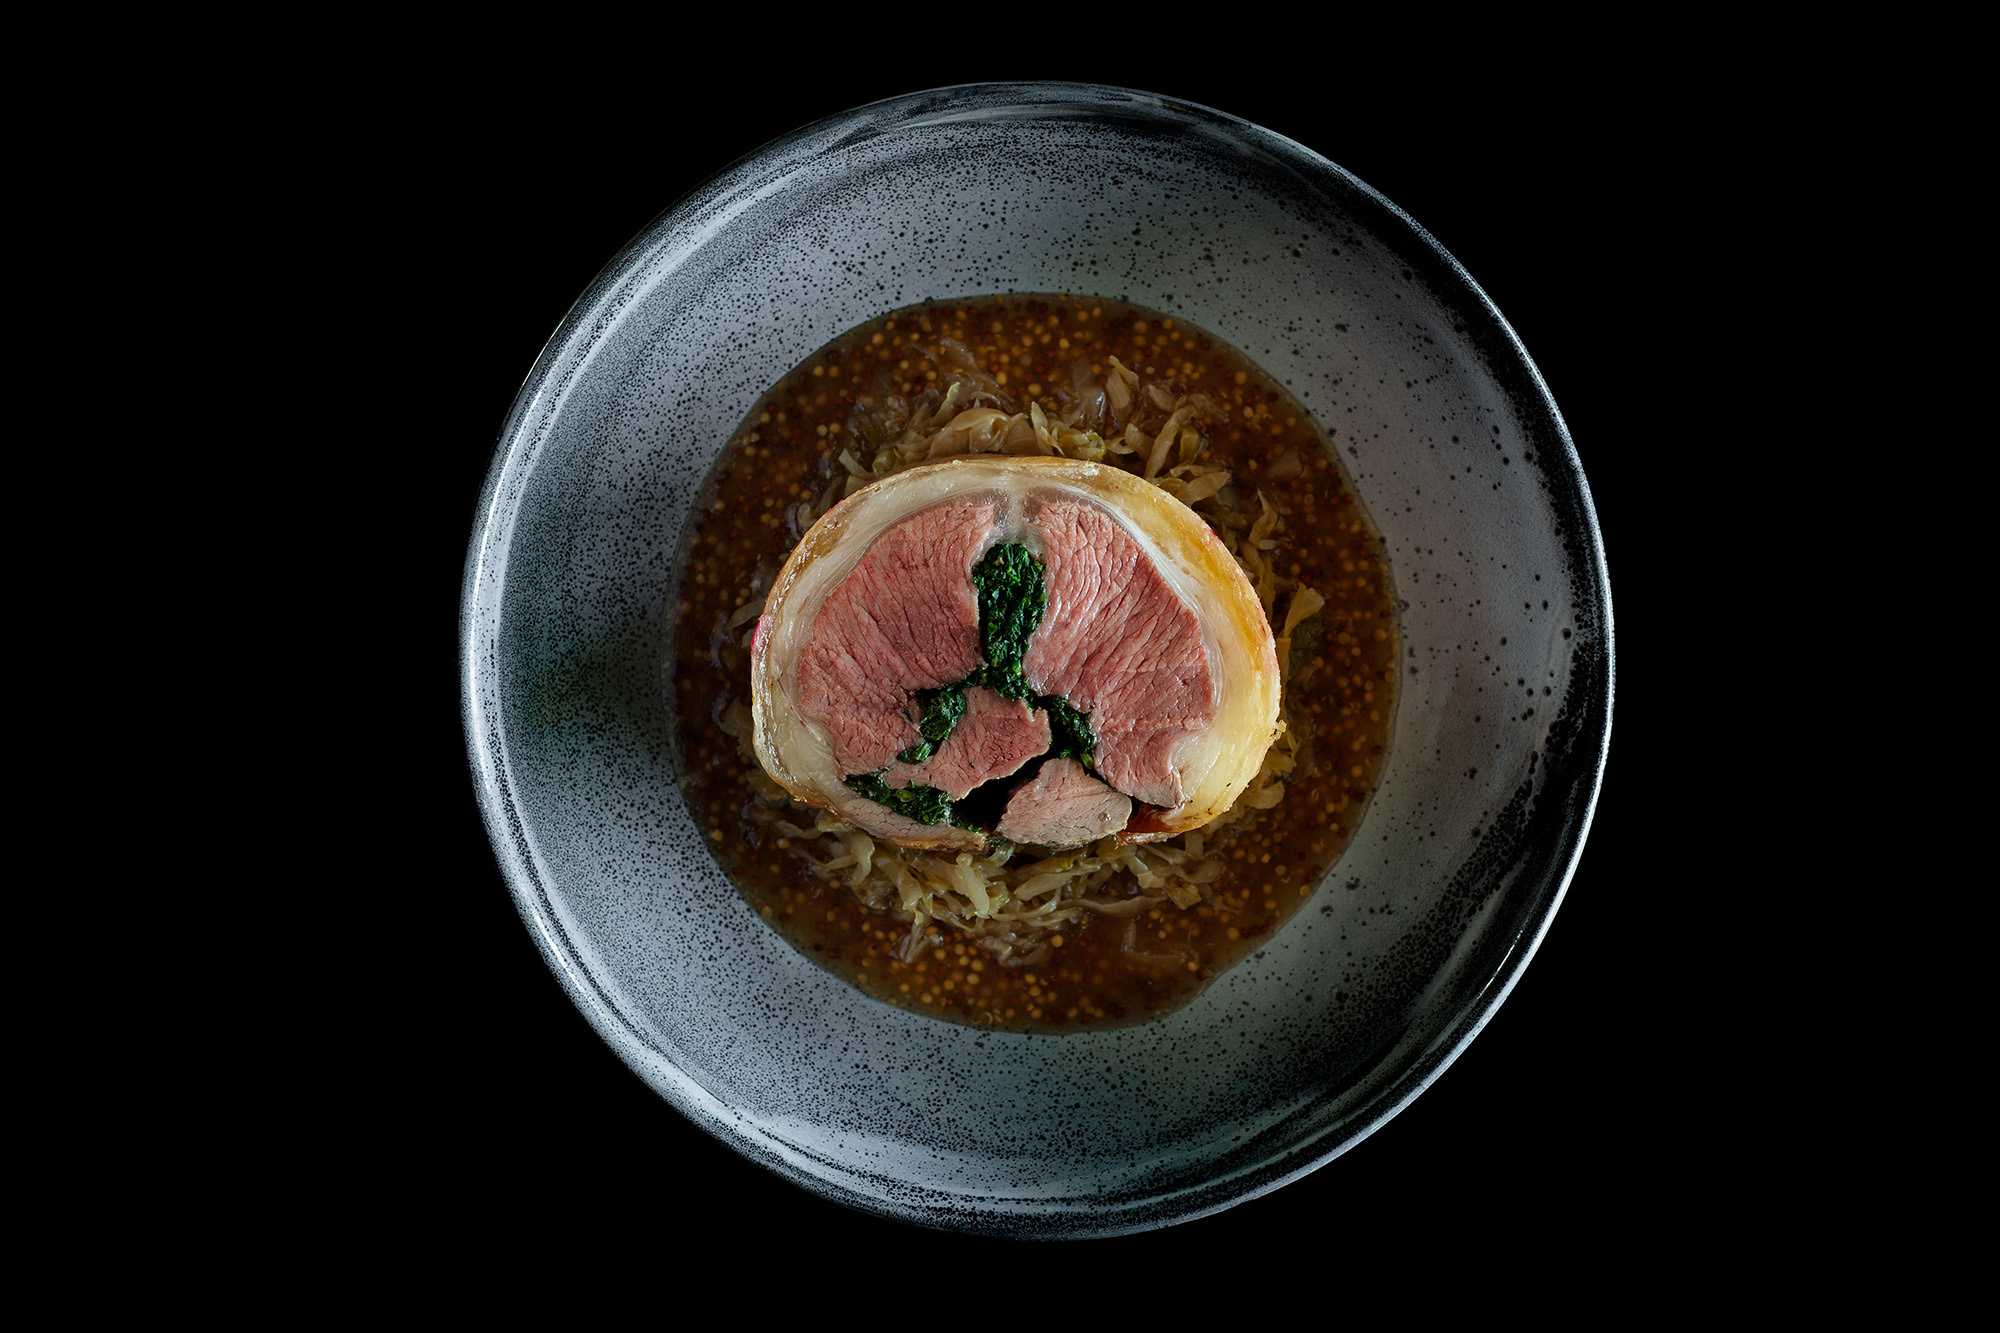 Rolled saddle of lamb with garden herbs, preserved sauerkraut and mustard sauce made from the whey of Margan’s cheese making process.